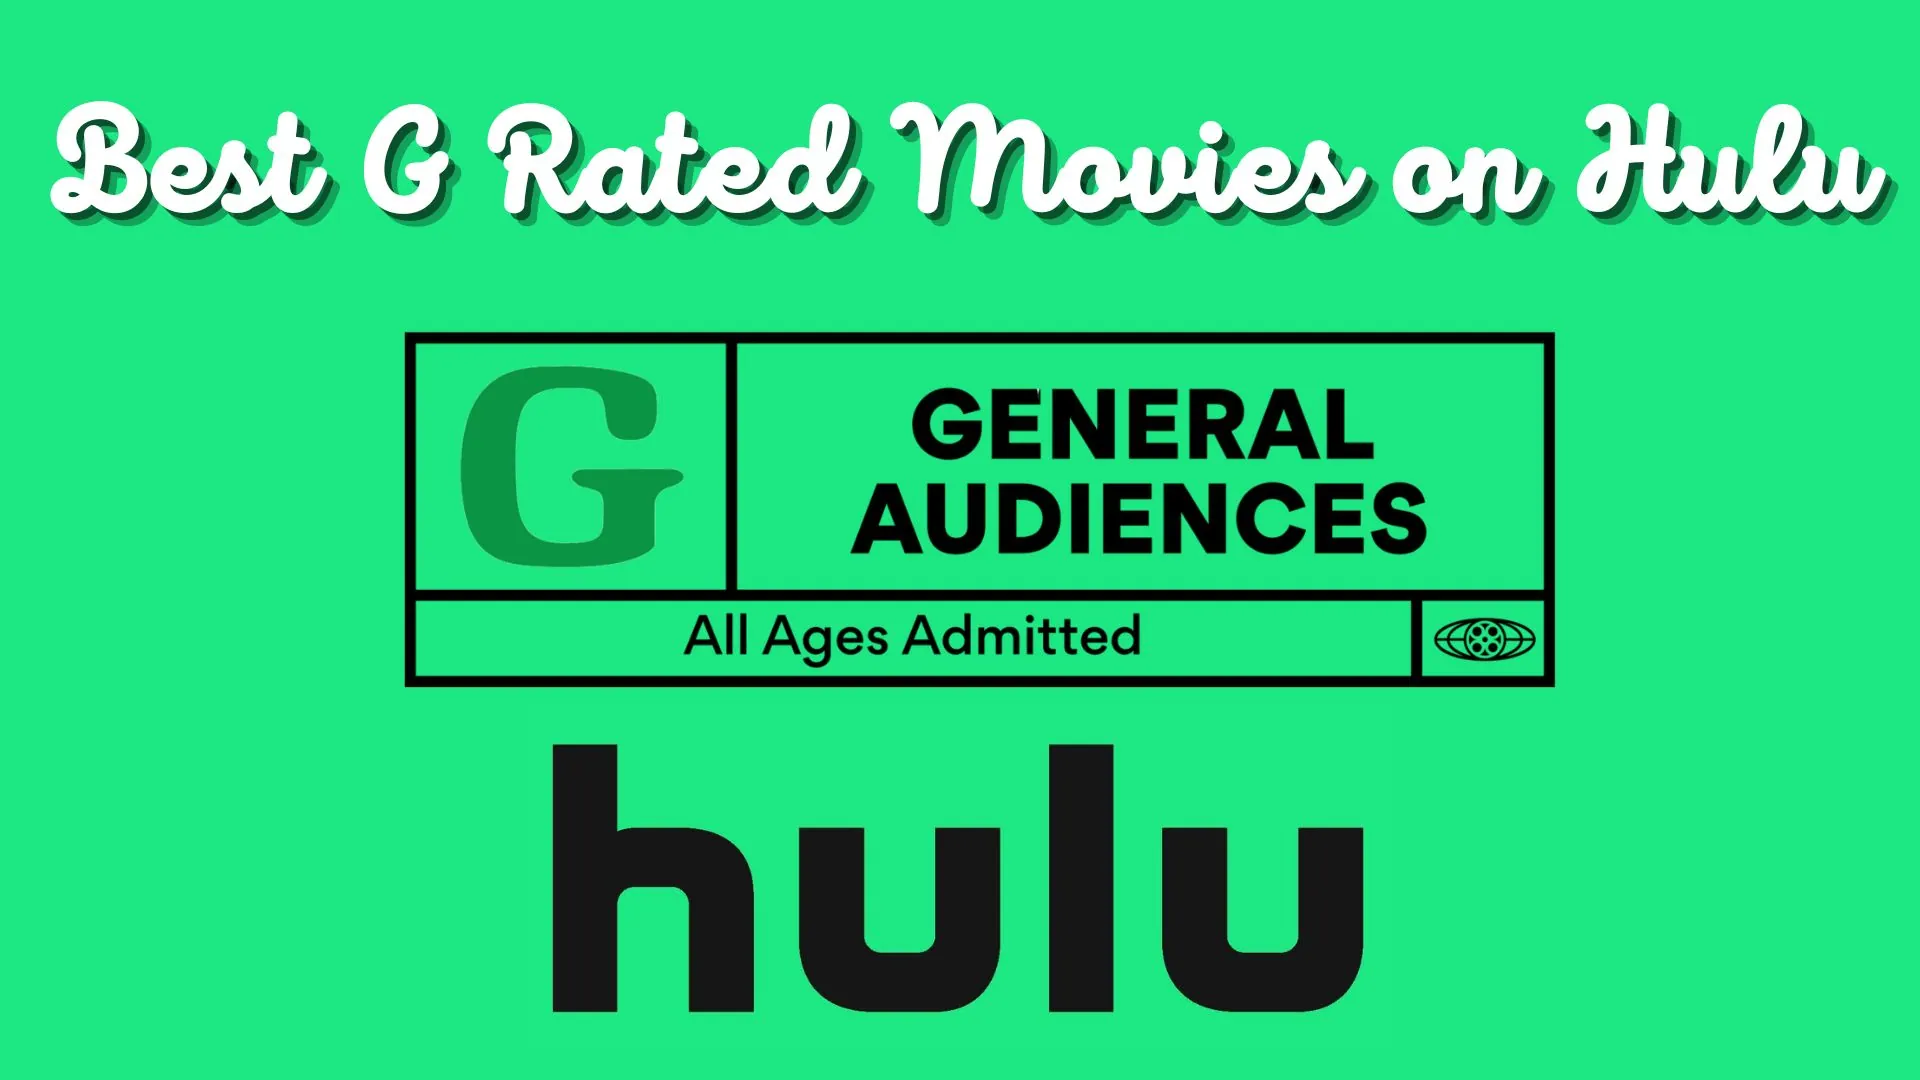 Best G Rated Movies on Hulu